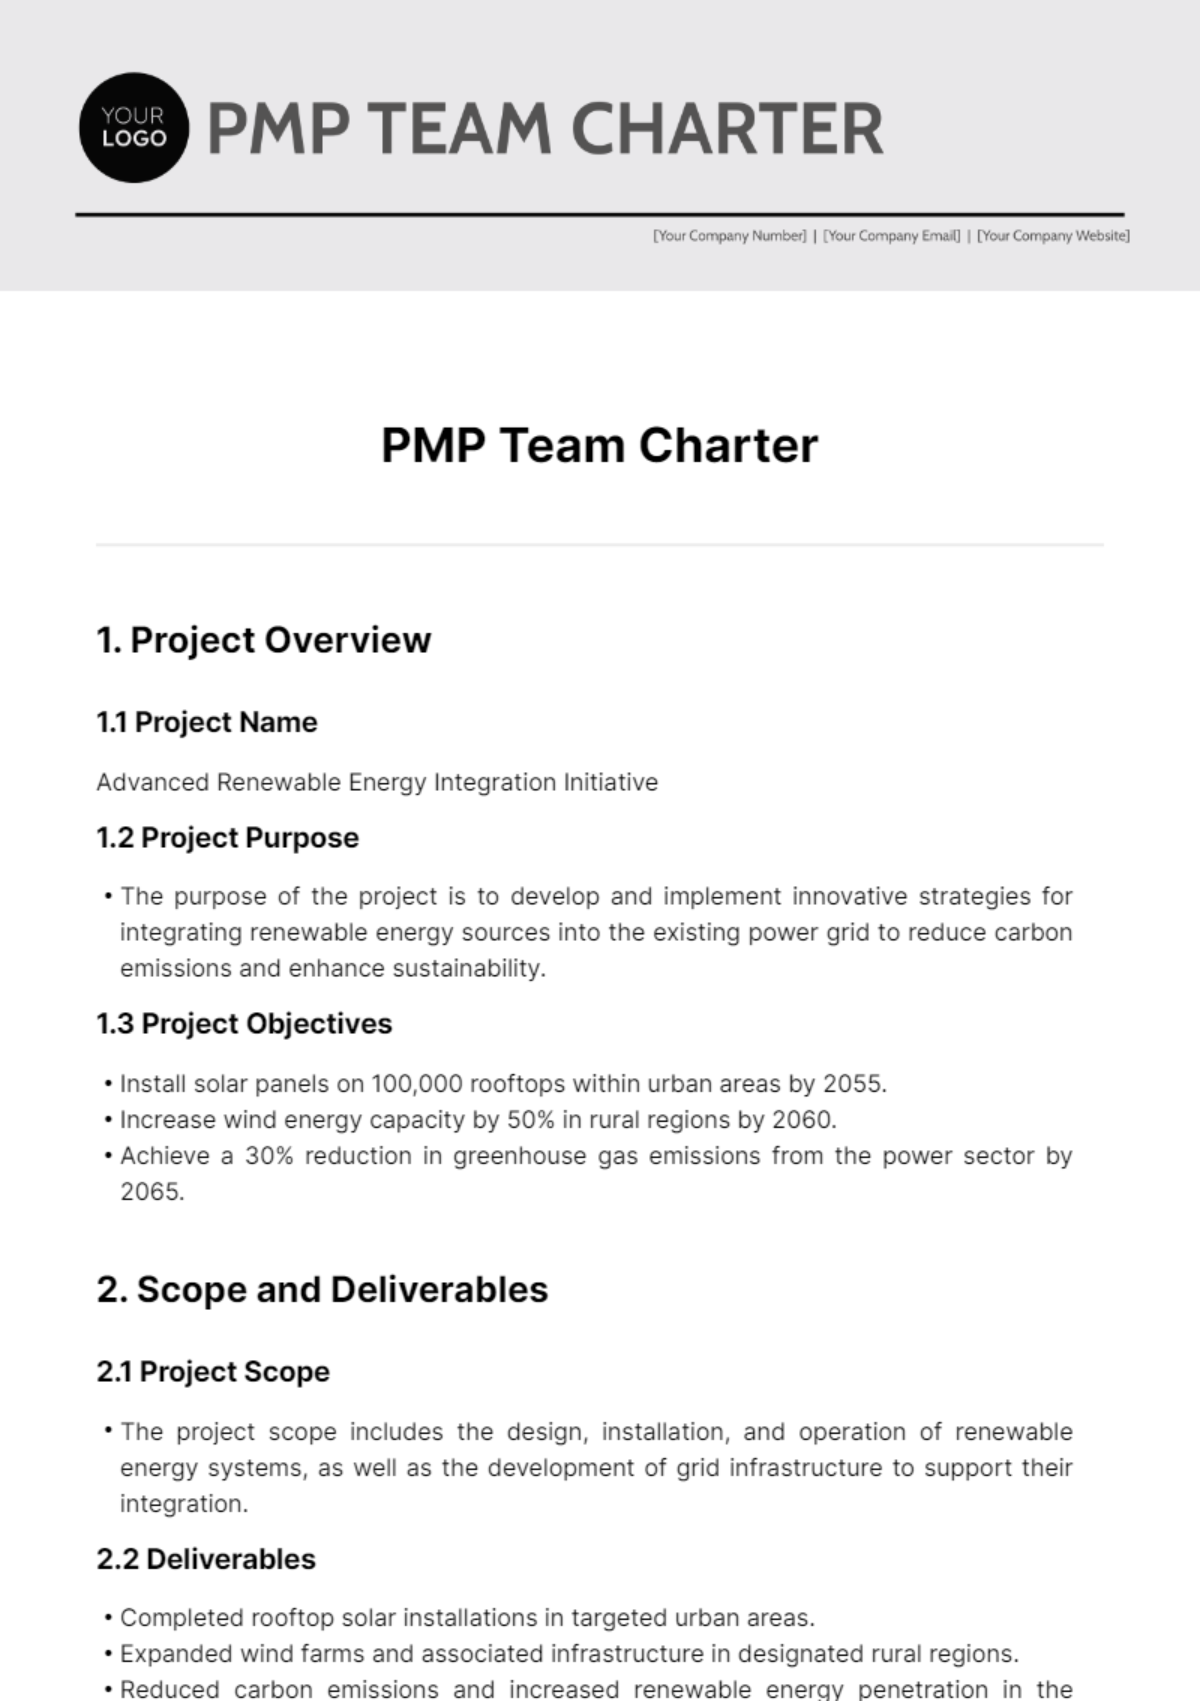 Free Pmp Team Charter Template